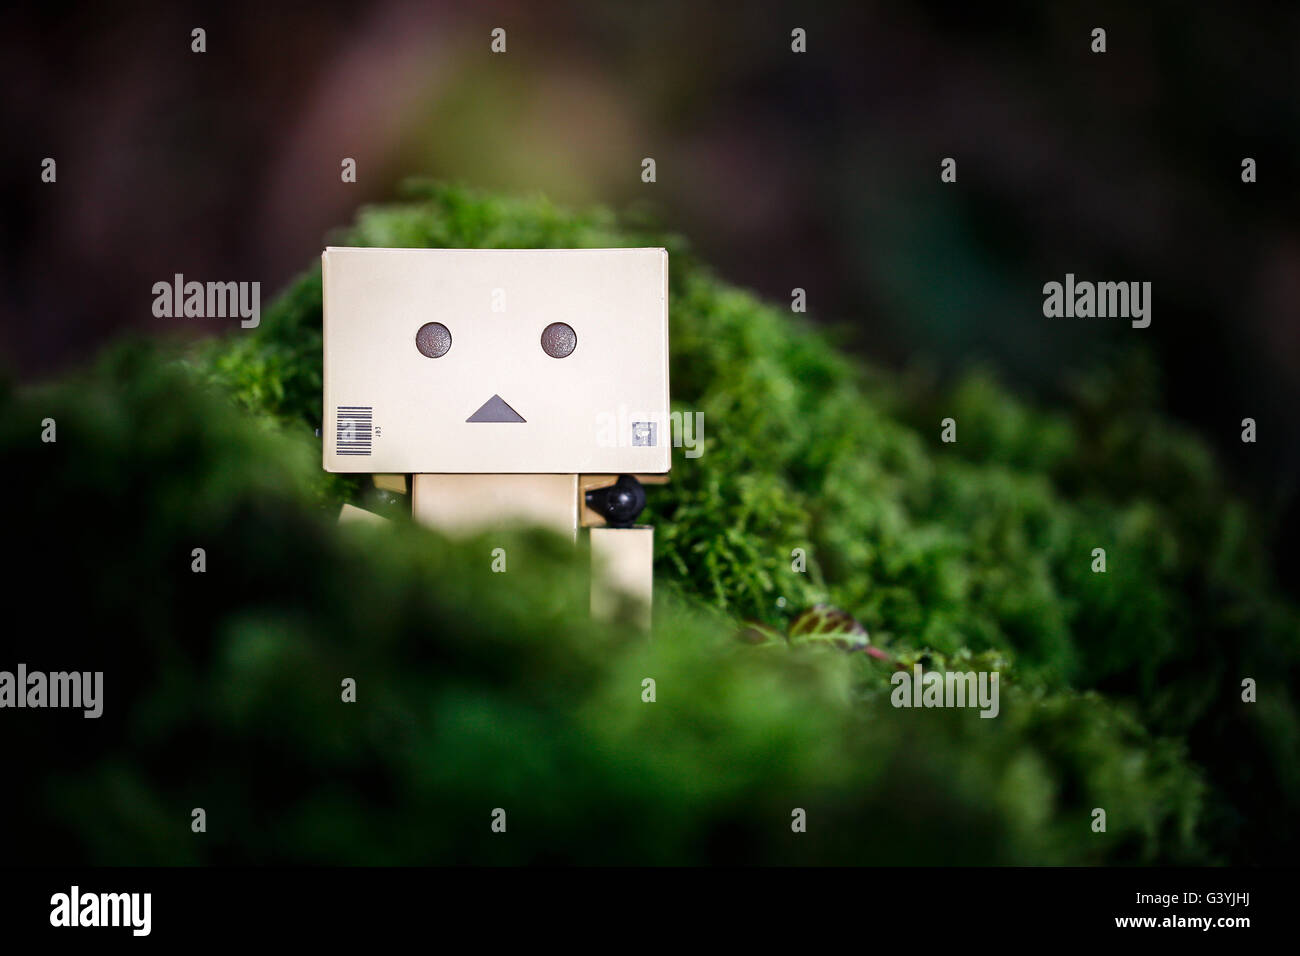 A Danbo Danboard Robot Character hiding amongst undergrowth and lichen in woodland. A fictional cardboard box robot character from Kiyohiko Azuma Stock Photo